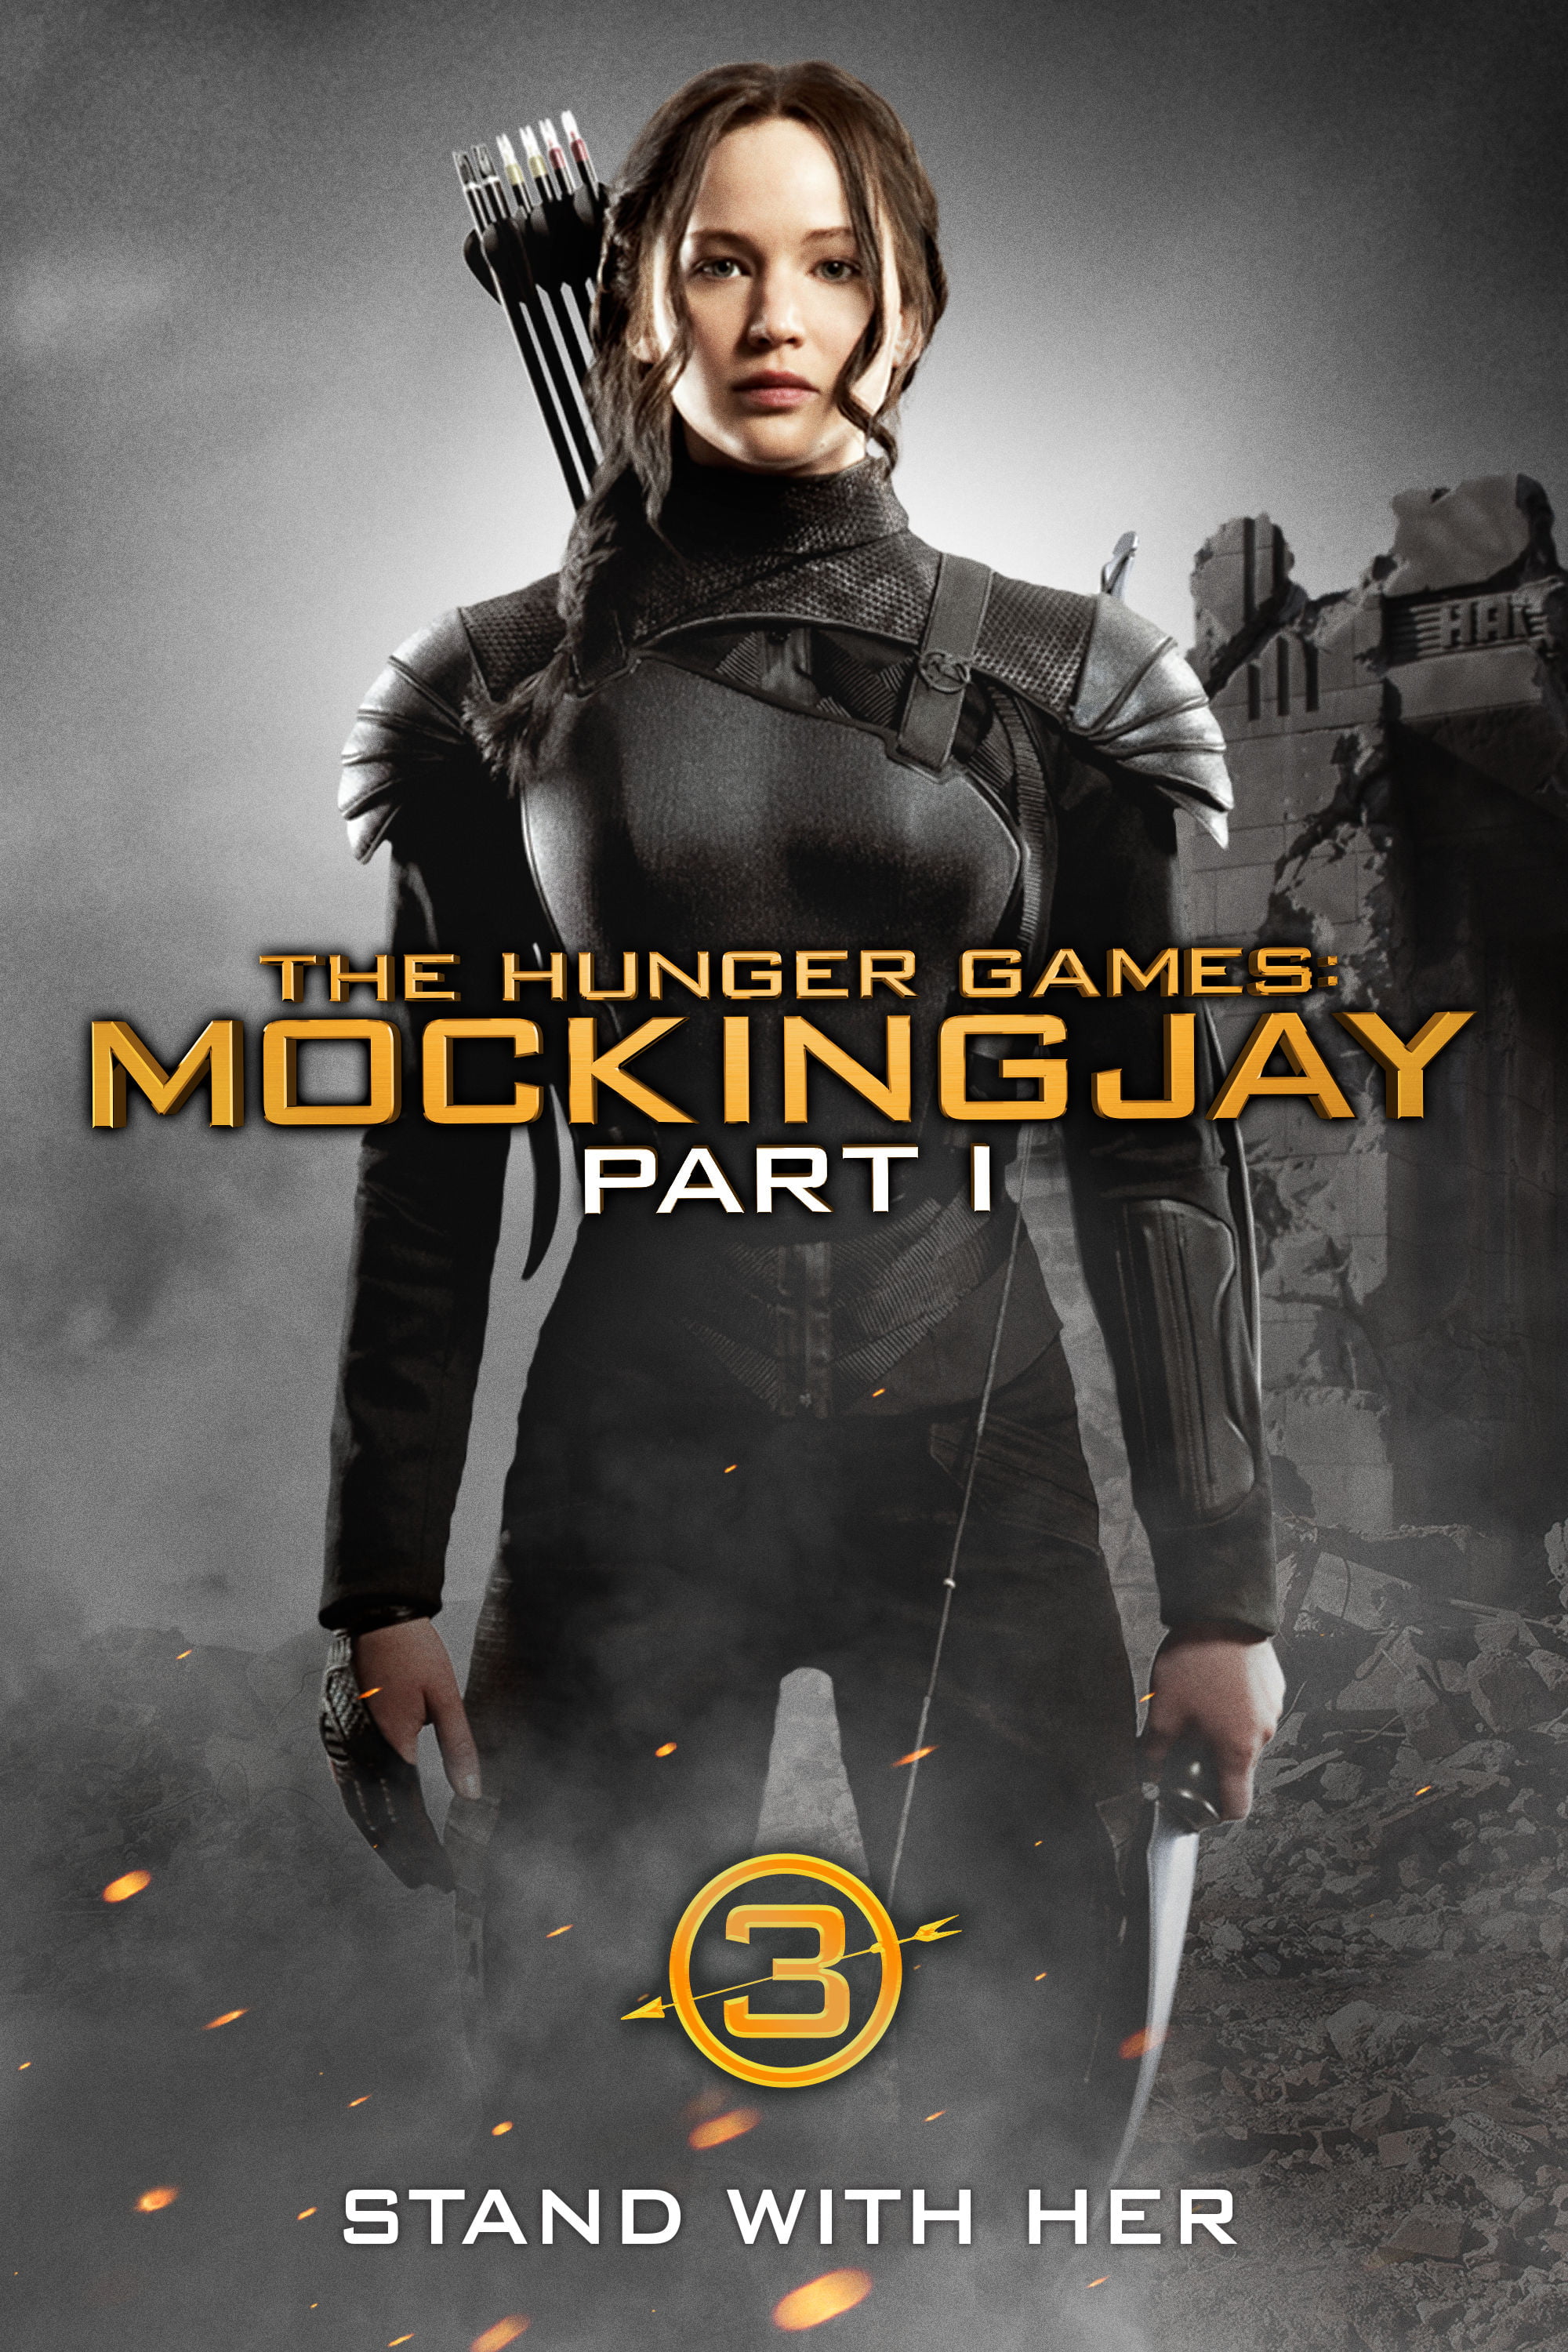 the-hunger-games-mockingjay-part-1-filming-locations-poster